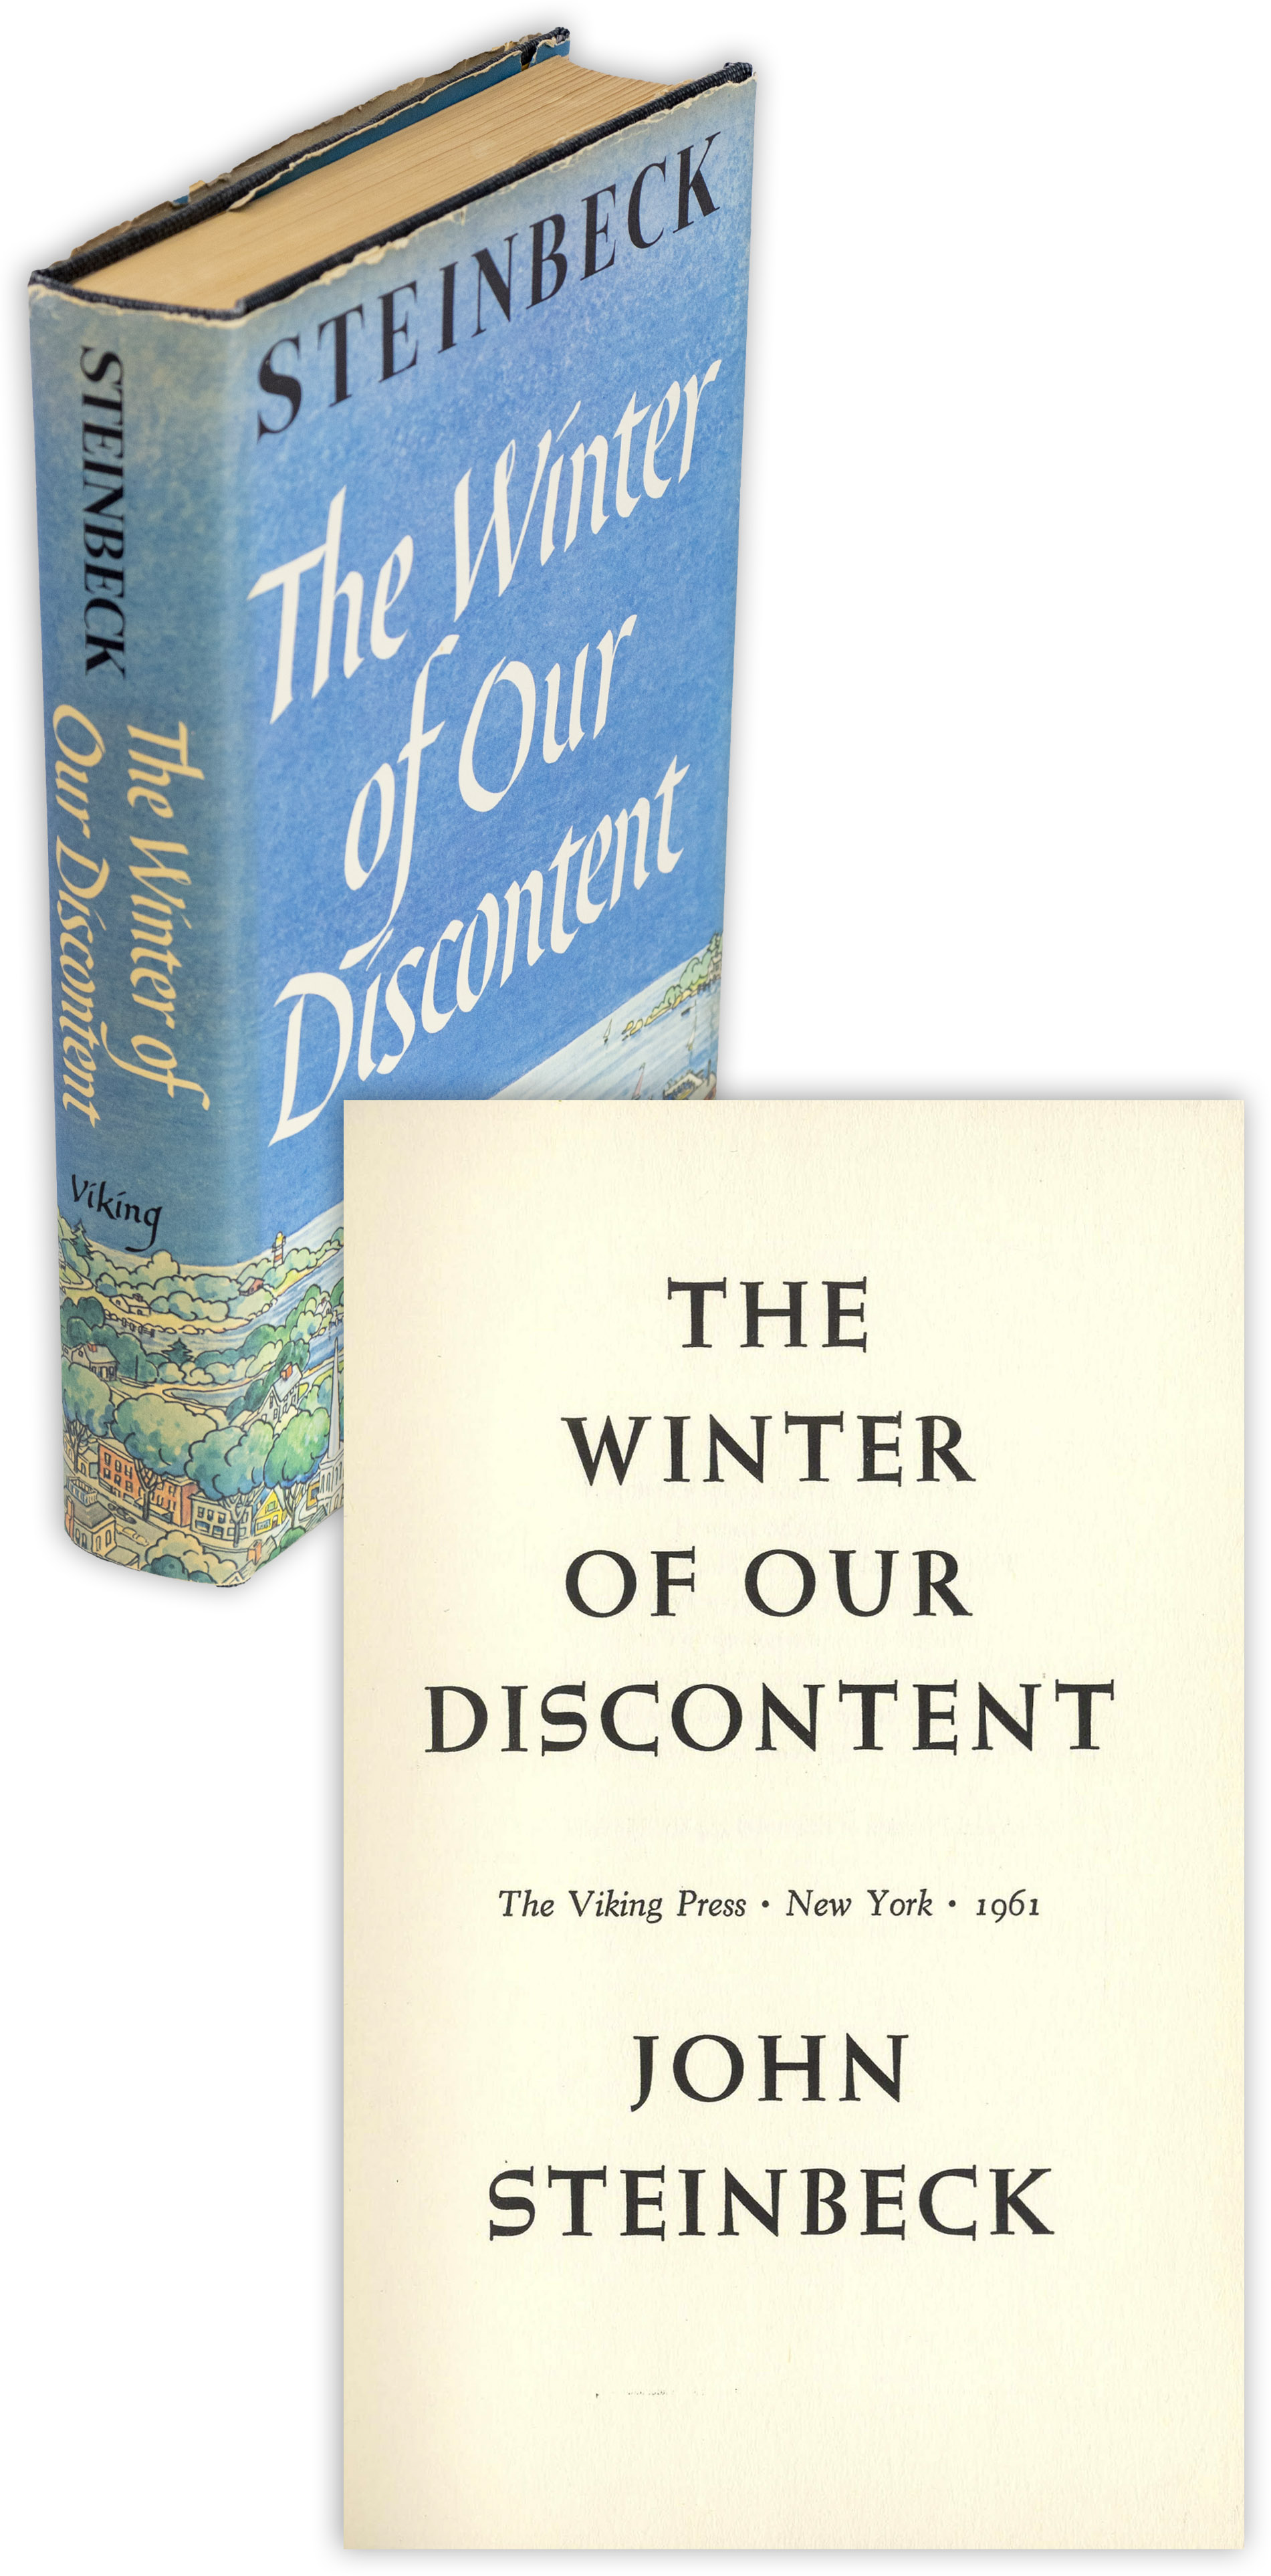 the winter of our discontent by john steinbeck